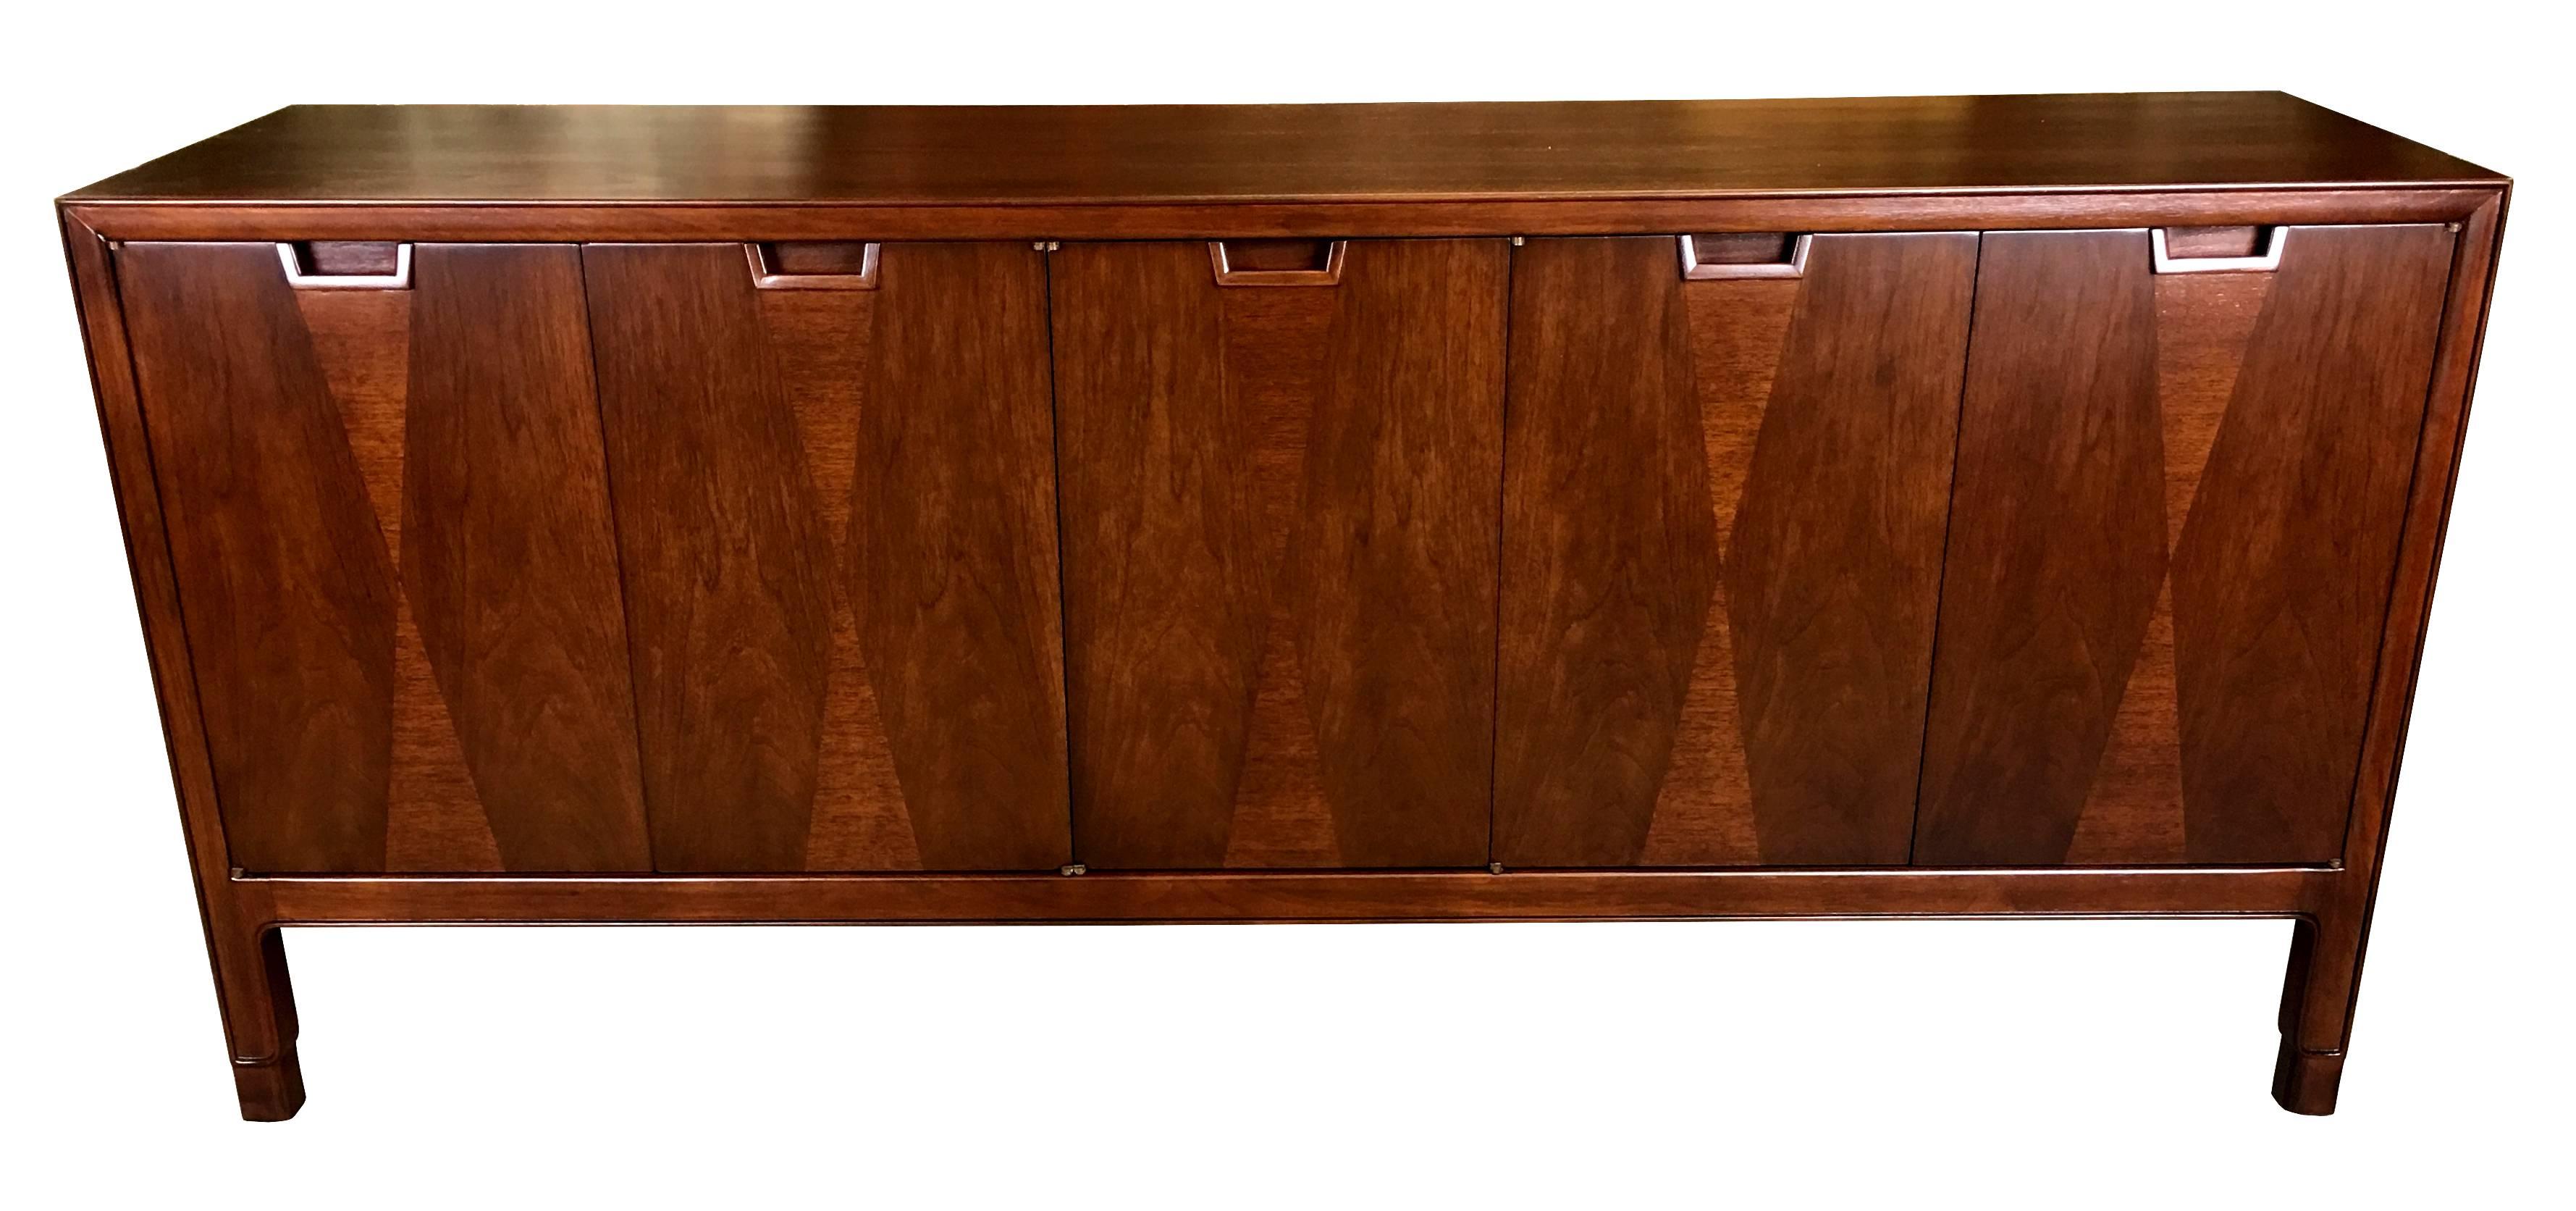 Finely crafted walnut sideboard or buffet by John Stuart, New York. The cabinet features inlaid diamond pattern on the doors, which conceal walnut-fronted pullouts on one side and a recessed shelf on the other half. The piece has been painstakingly